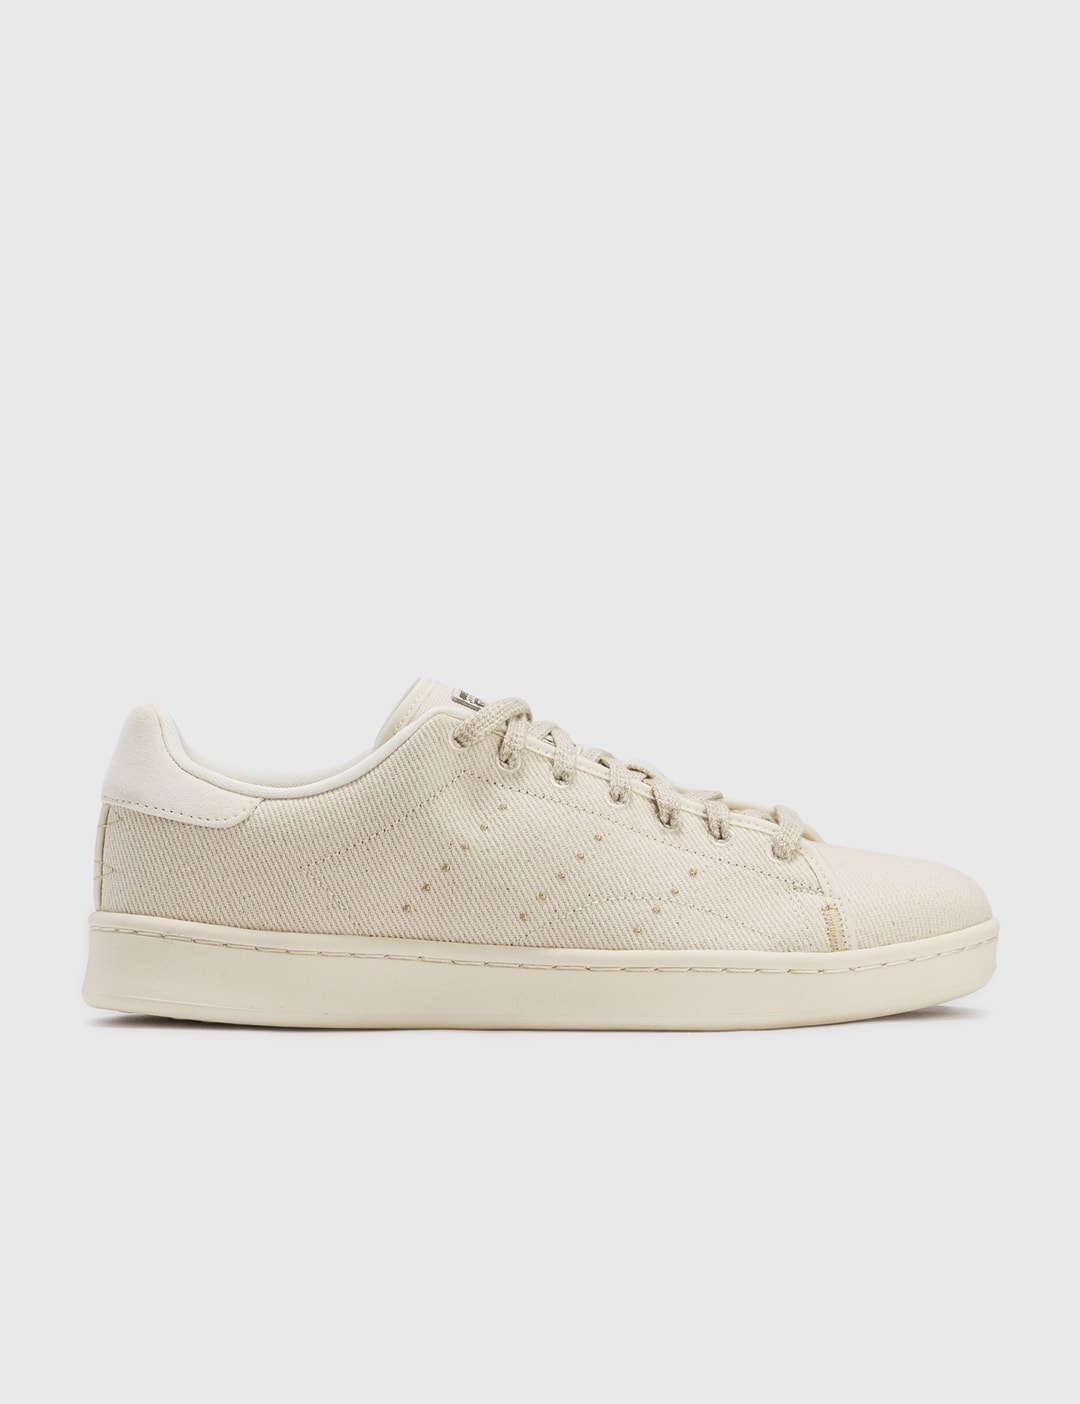 enemy Masaccio scar Adidas Originals - Stan Smith H | HBX - Globally Curated Fashion and  Lifestyle by Hypebeast